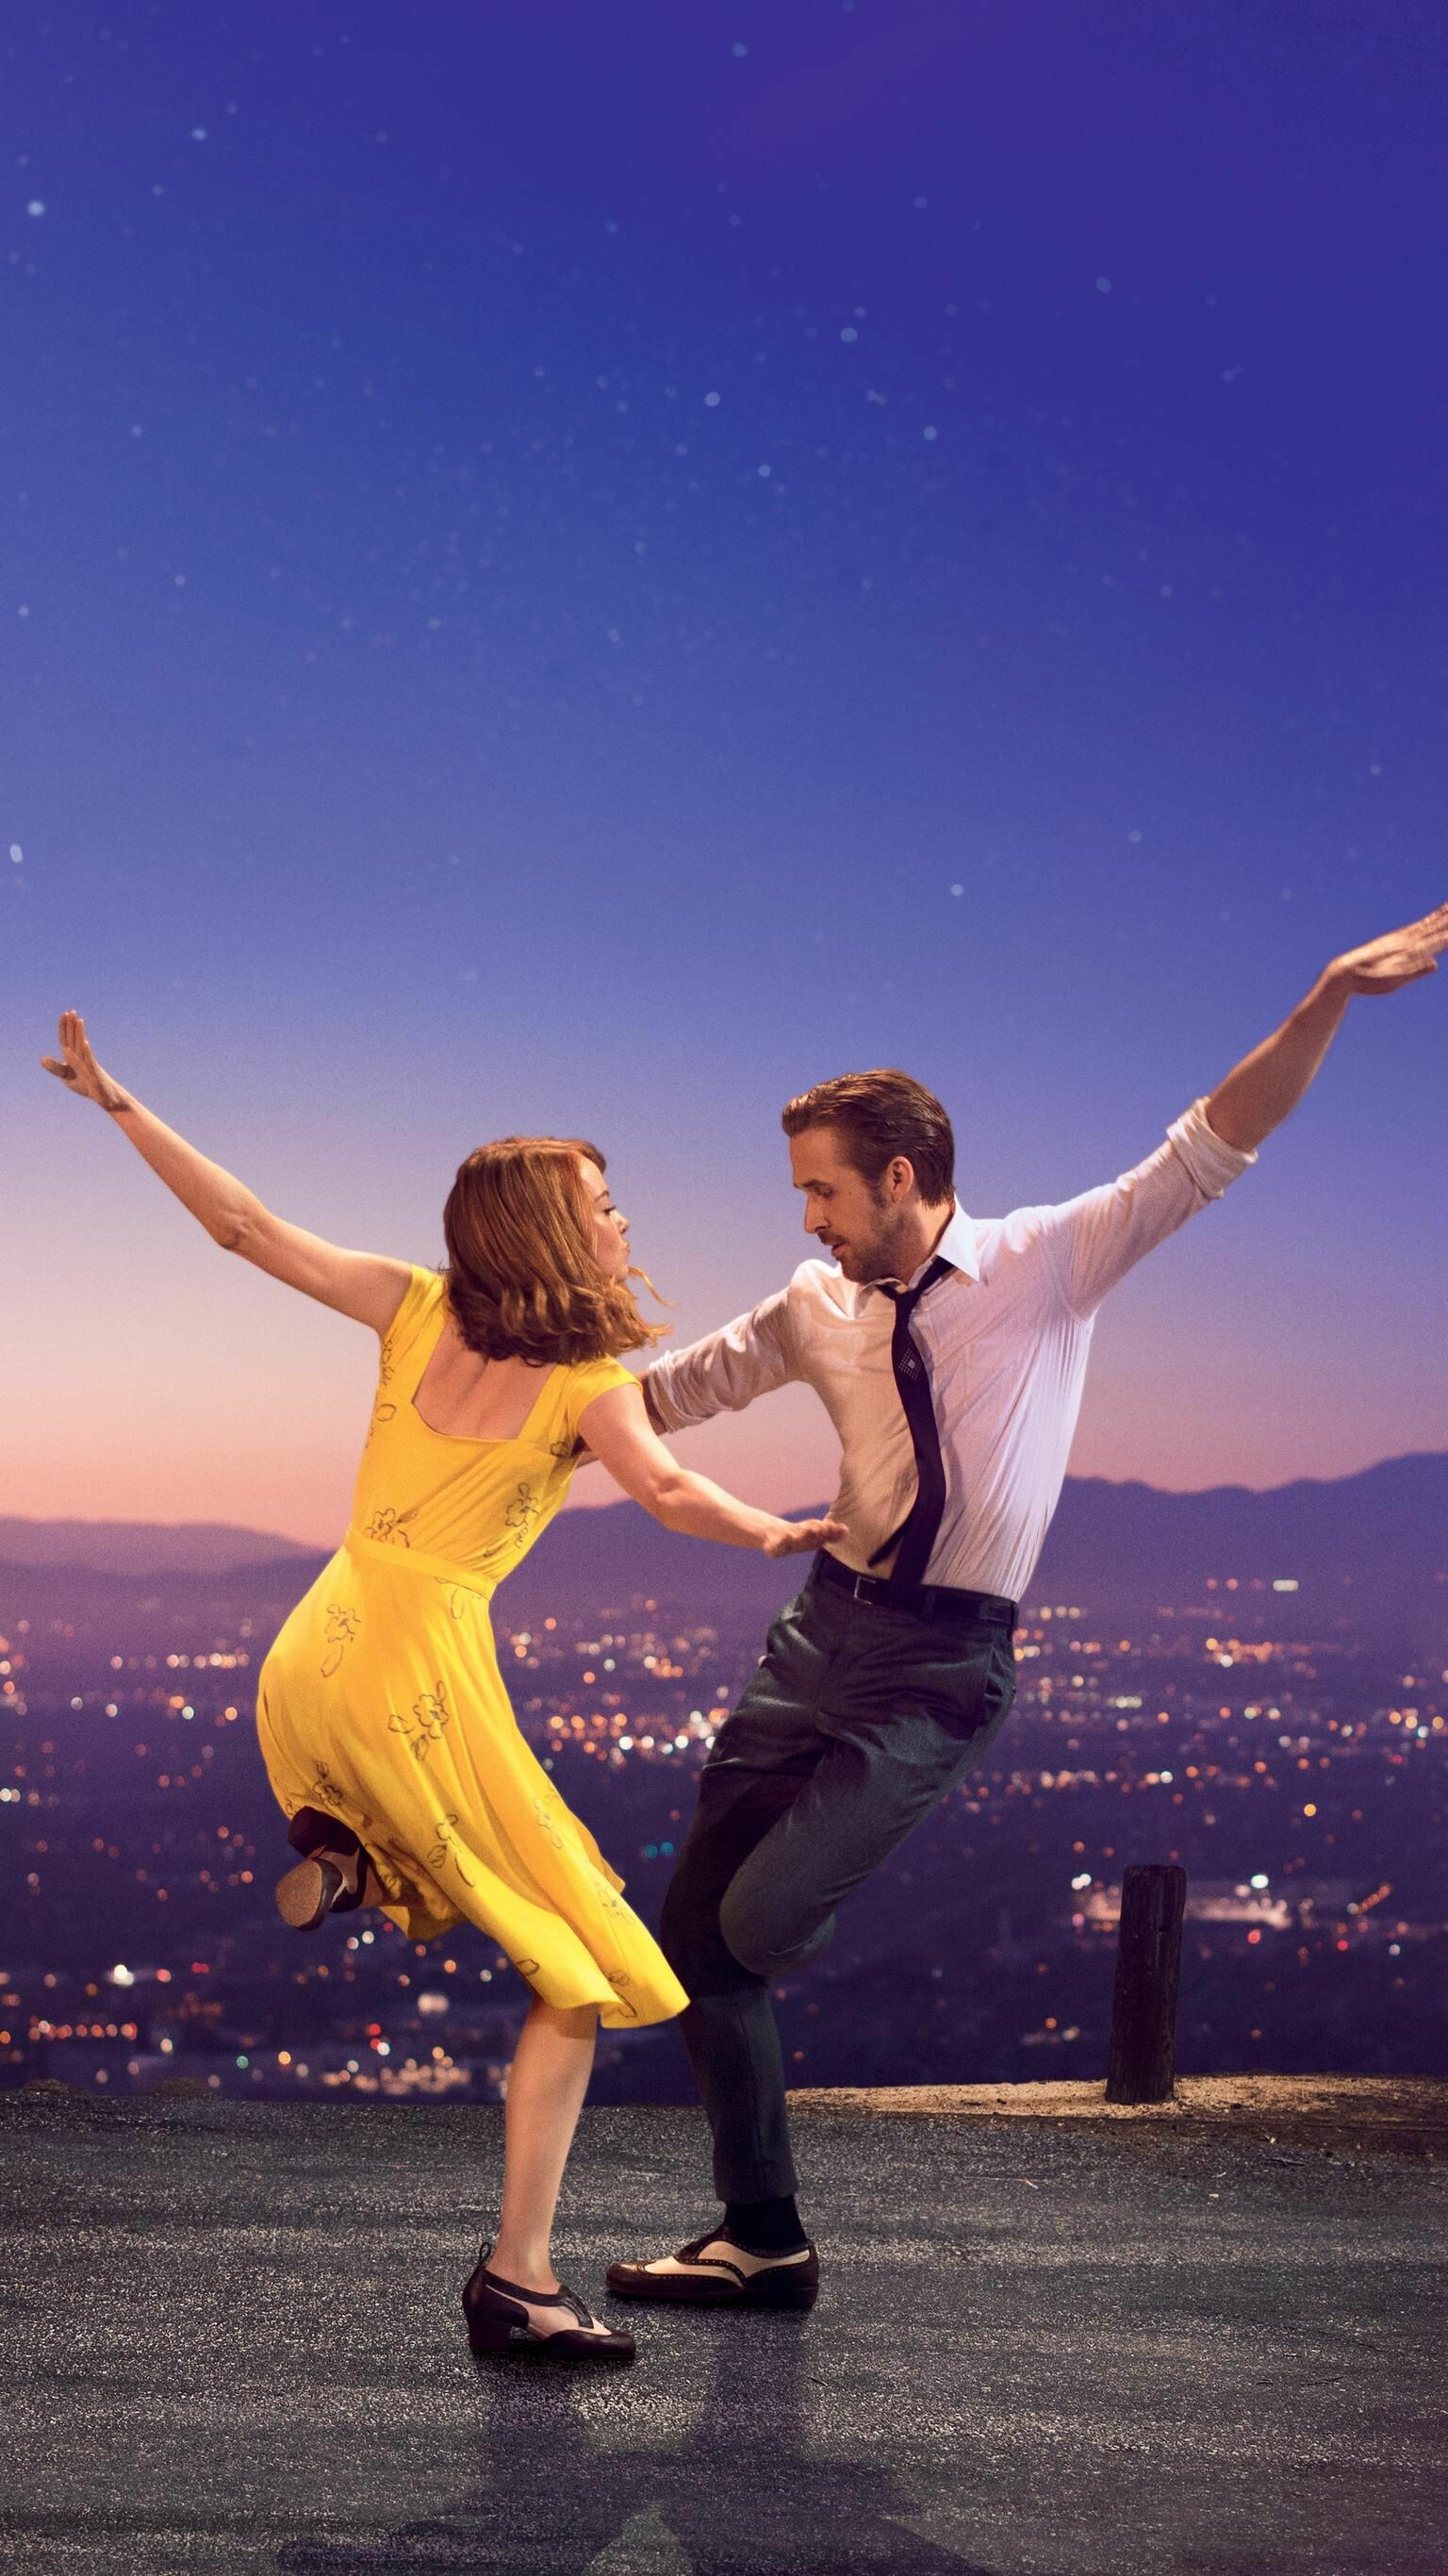 La La Land: It won a record-breaking seven awards from its seven nominations at the 74th Golden Globes and received eleven nominations at the 70th British Academy Film Awards, winning five, including Best Film. 1540x2740 HD Wallpaper.